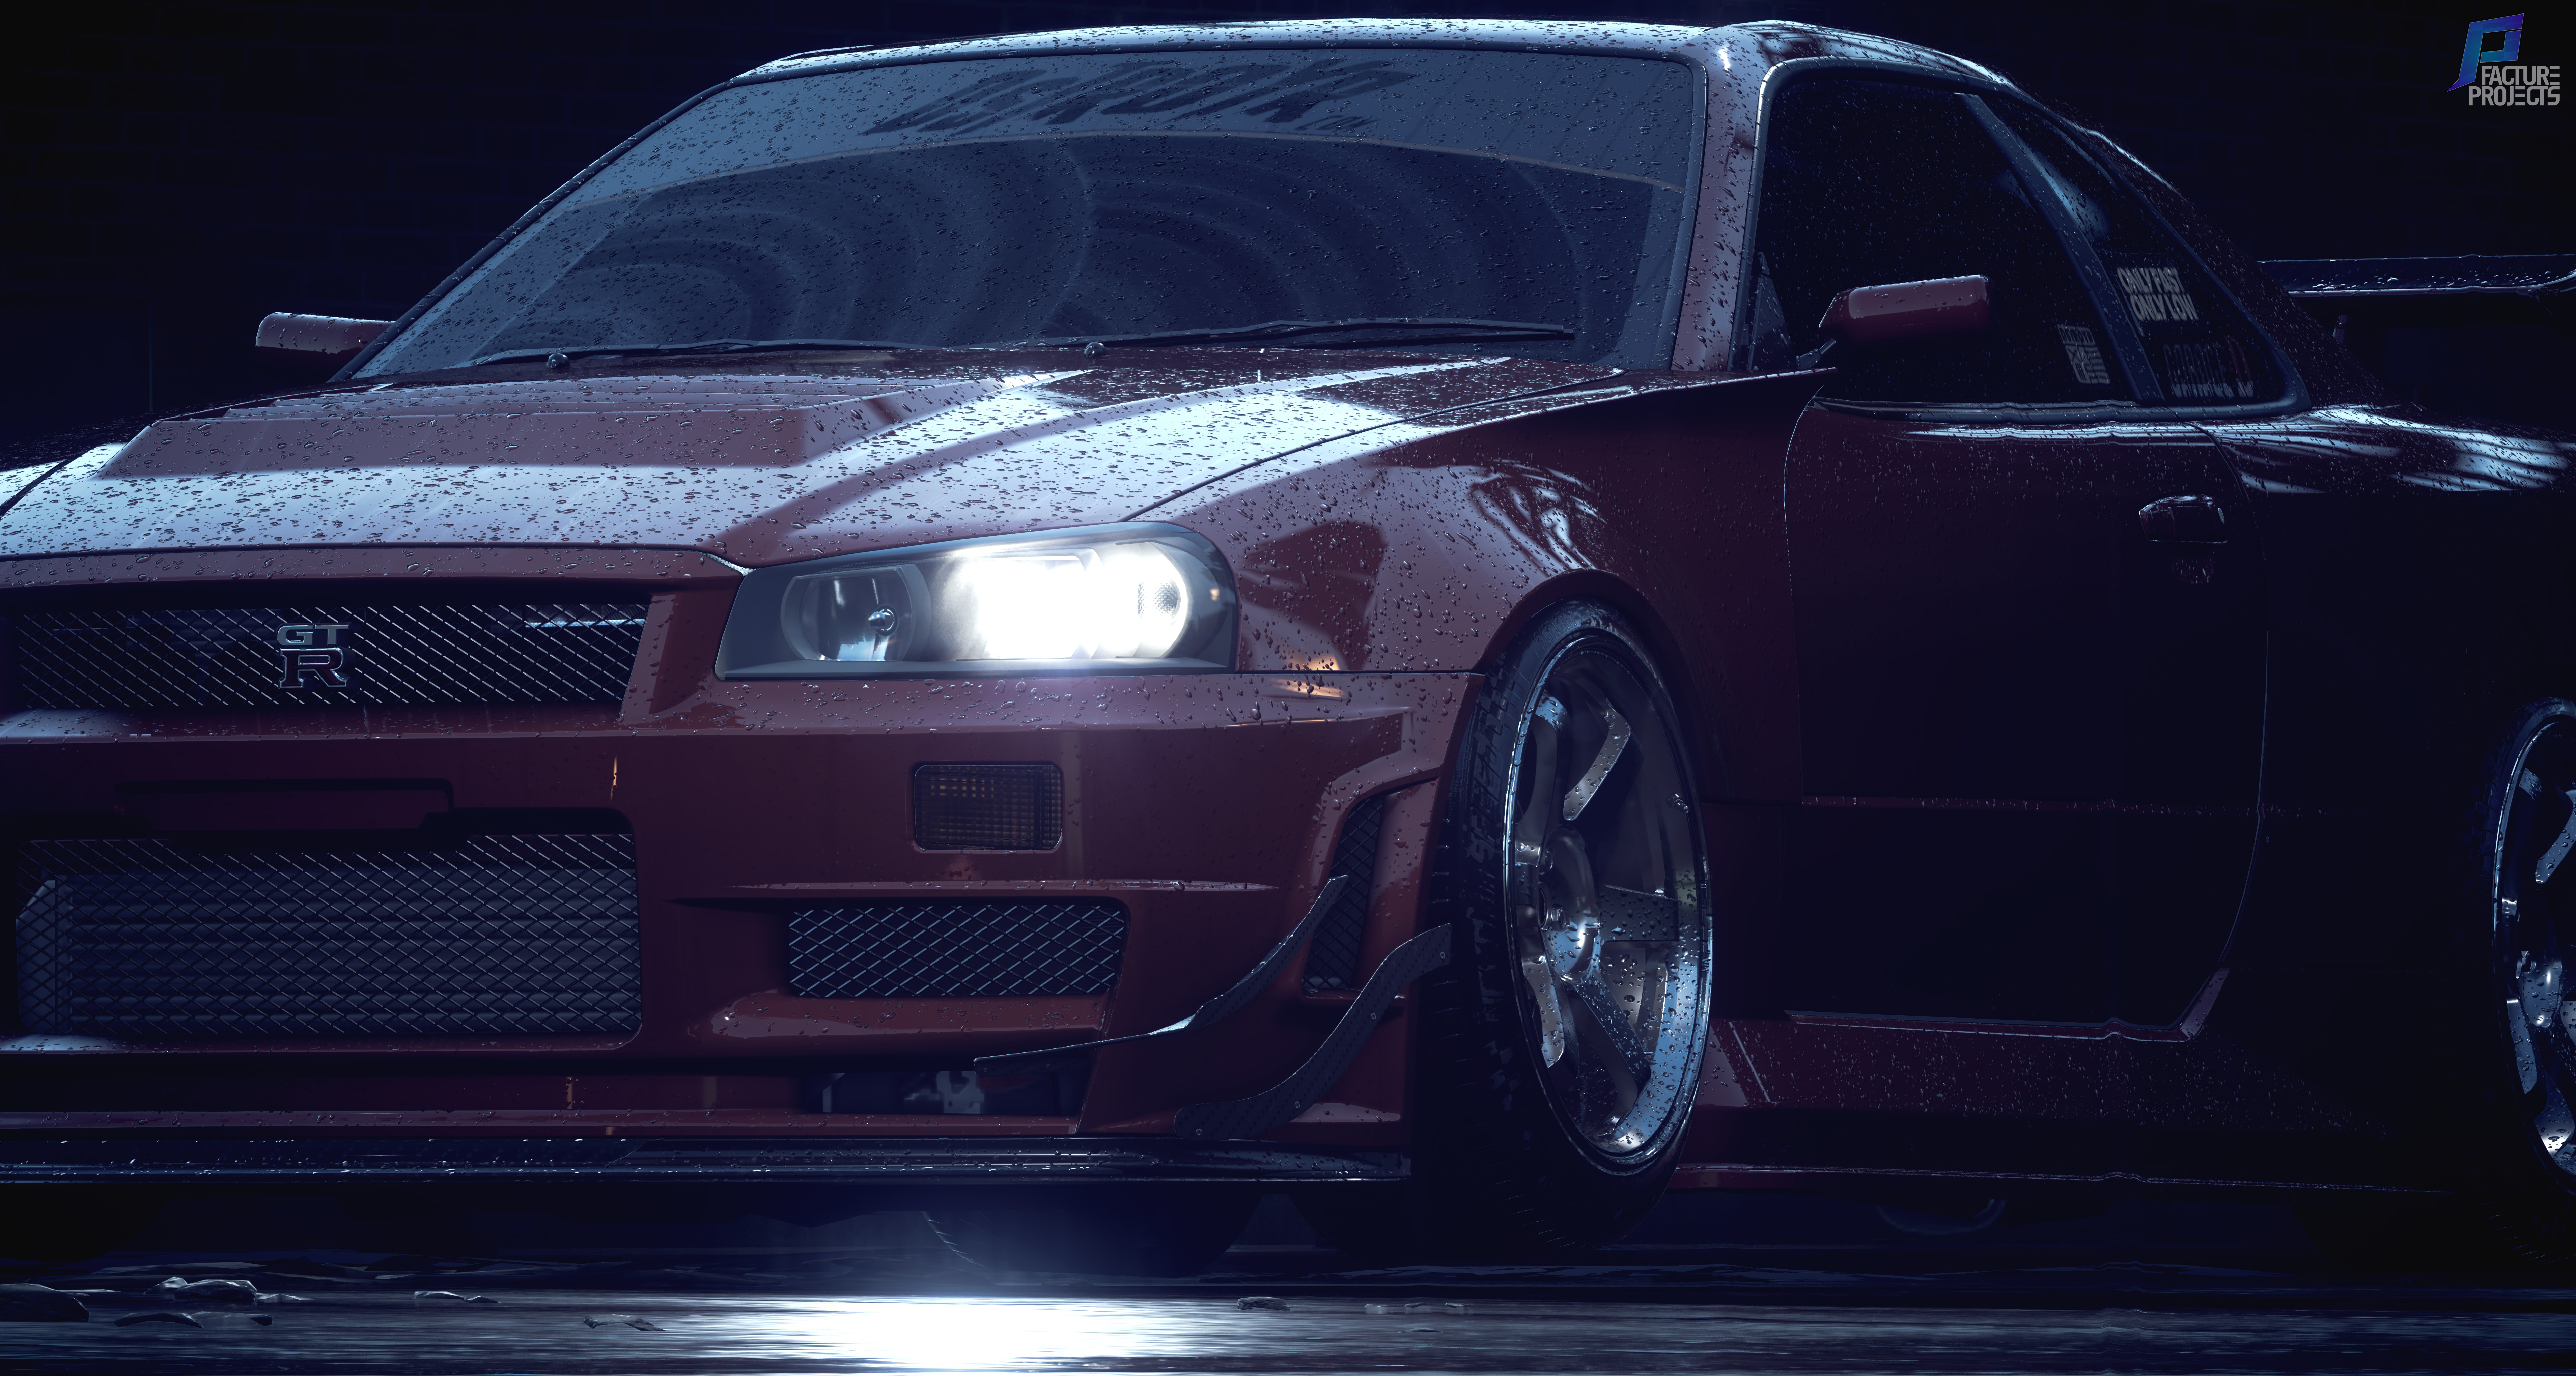 Need For Speed NFS 2015 Nissan Skyline GT R R34 Red Car 7636x4080